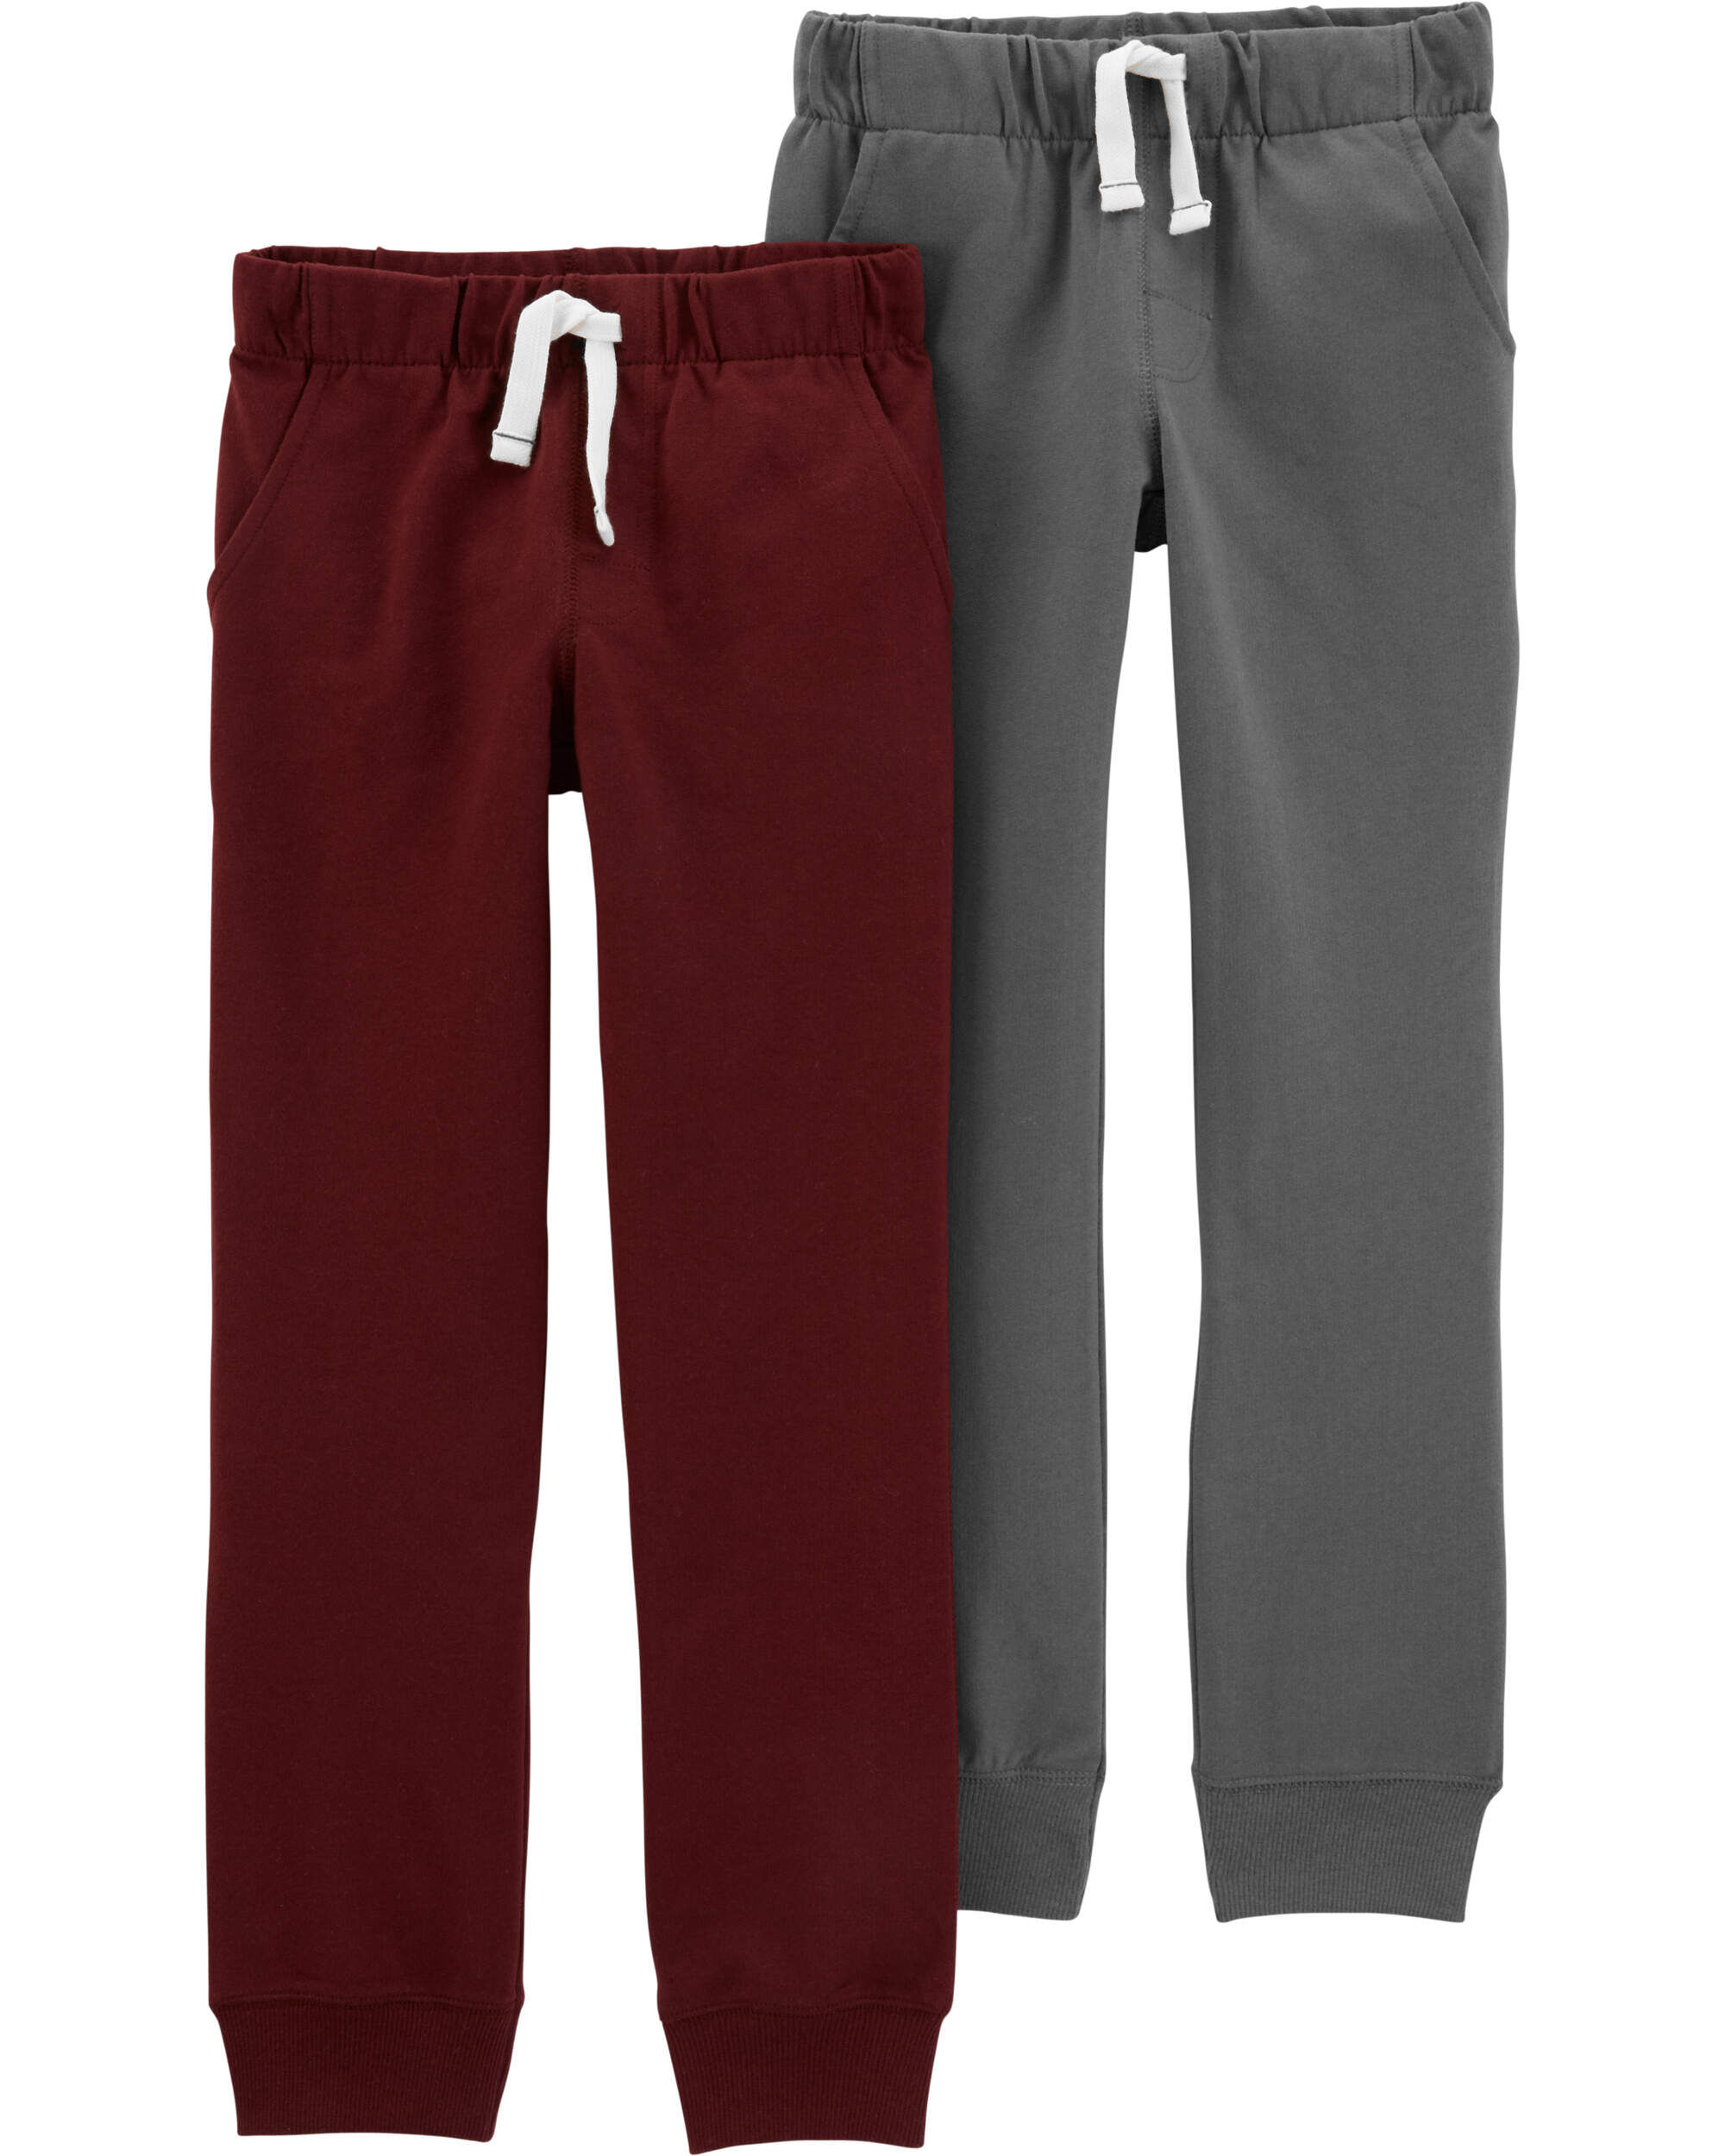 Boys Active French Terry Jogger Pants 3-Pack